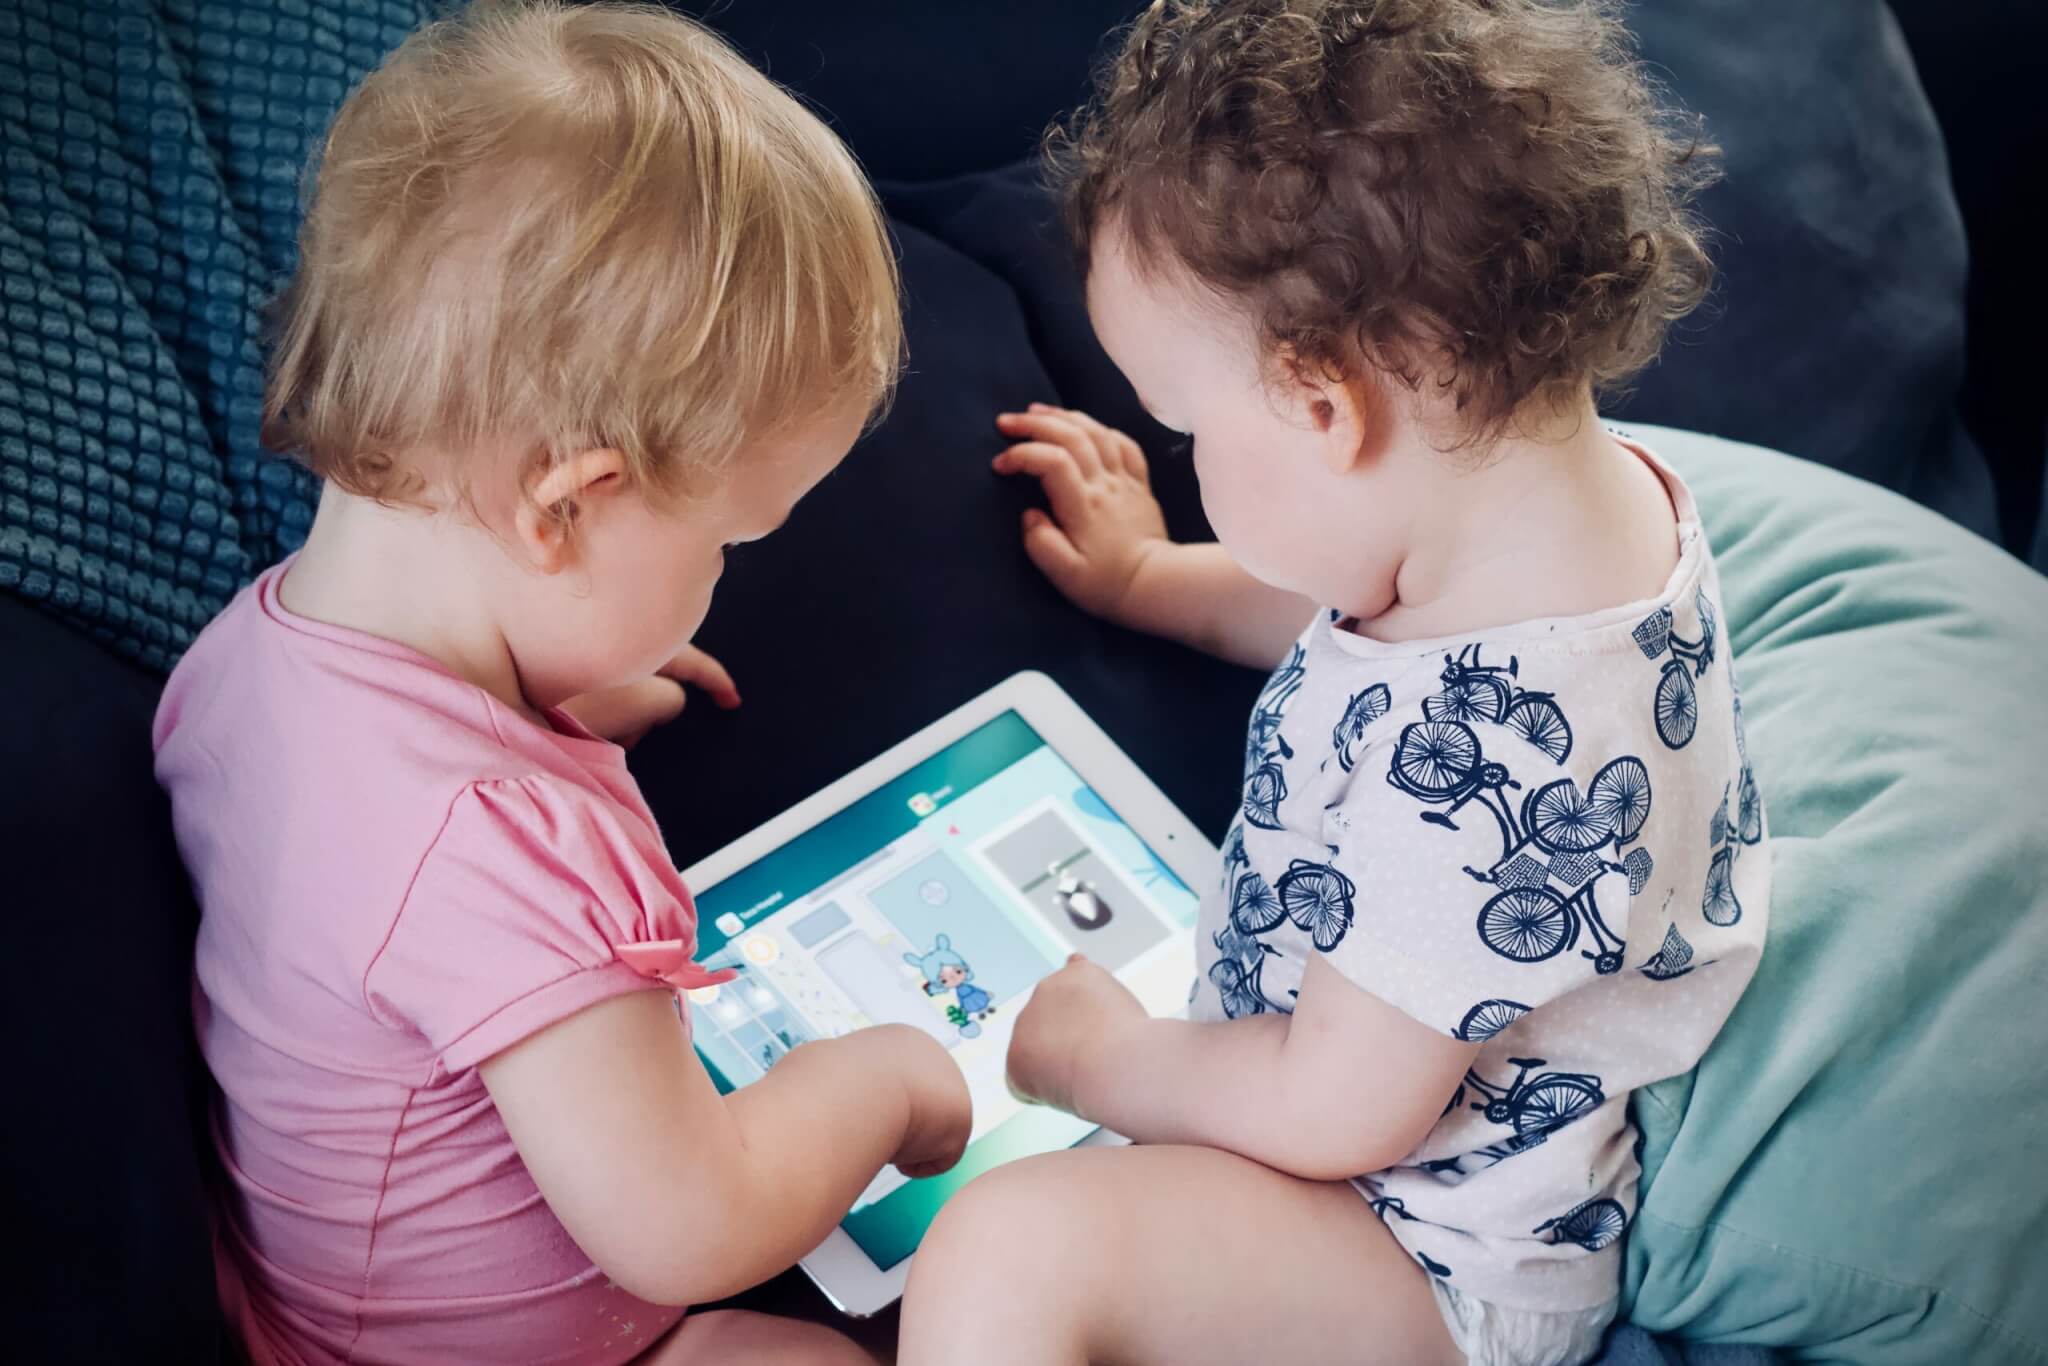 Children screen time: Toddlers on iPad or tablet